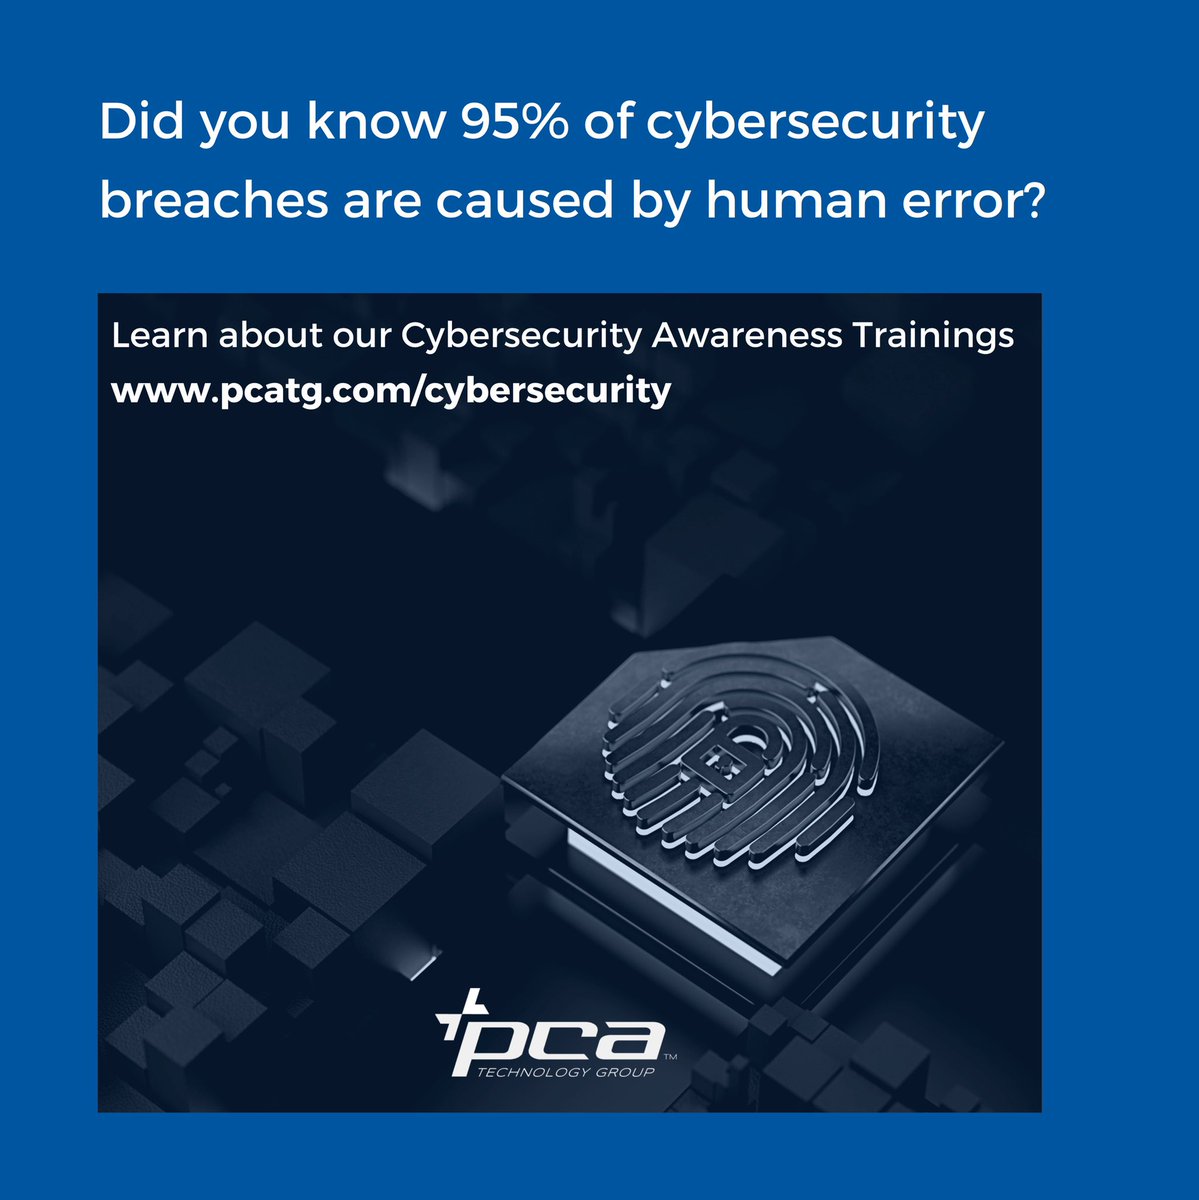 Join an upcoming Cybersecurity Awareness Training with Brian Powell, Network Engineering Manager and Certified Ethical Hacker from PCA! Register at pcatg.com/cybersecurity #stophackers #cyberattacks #employeeeducation